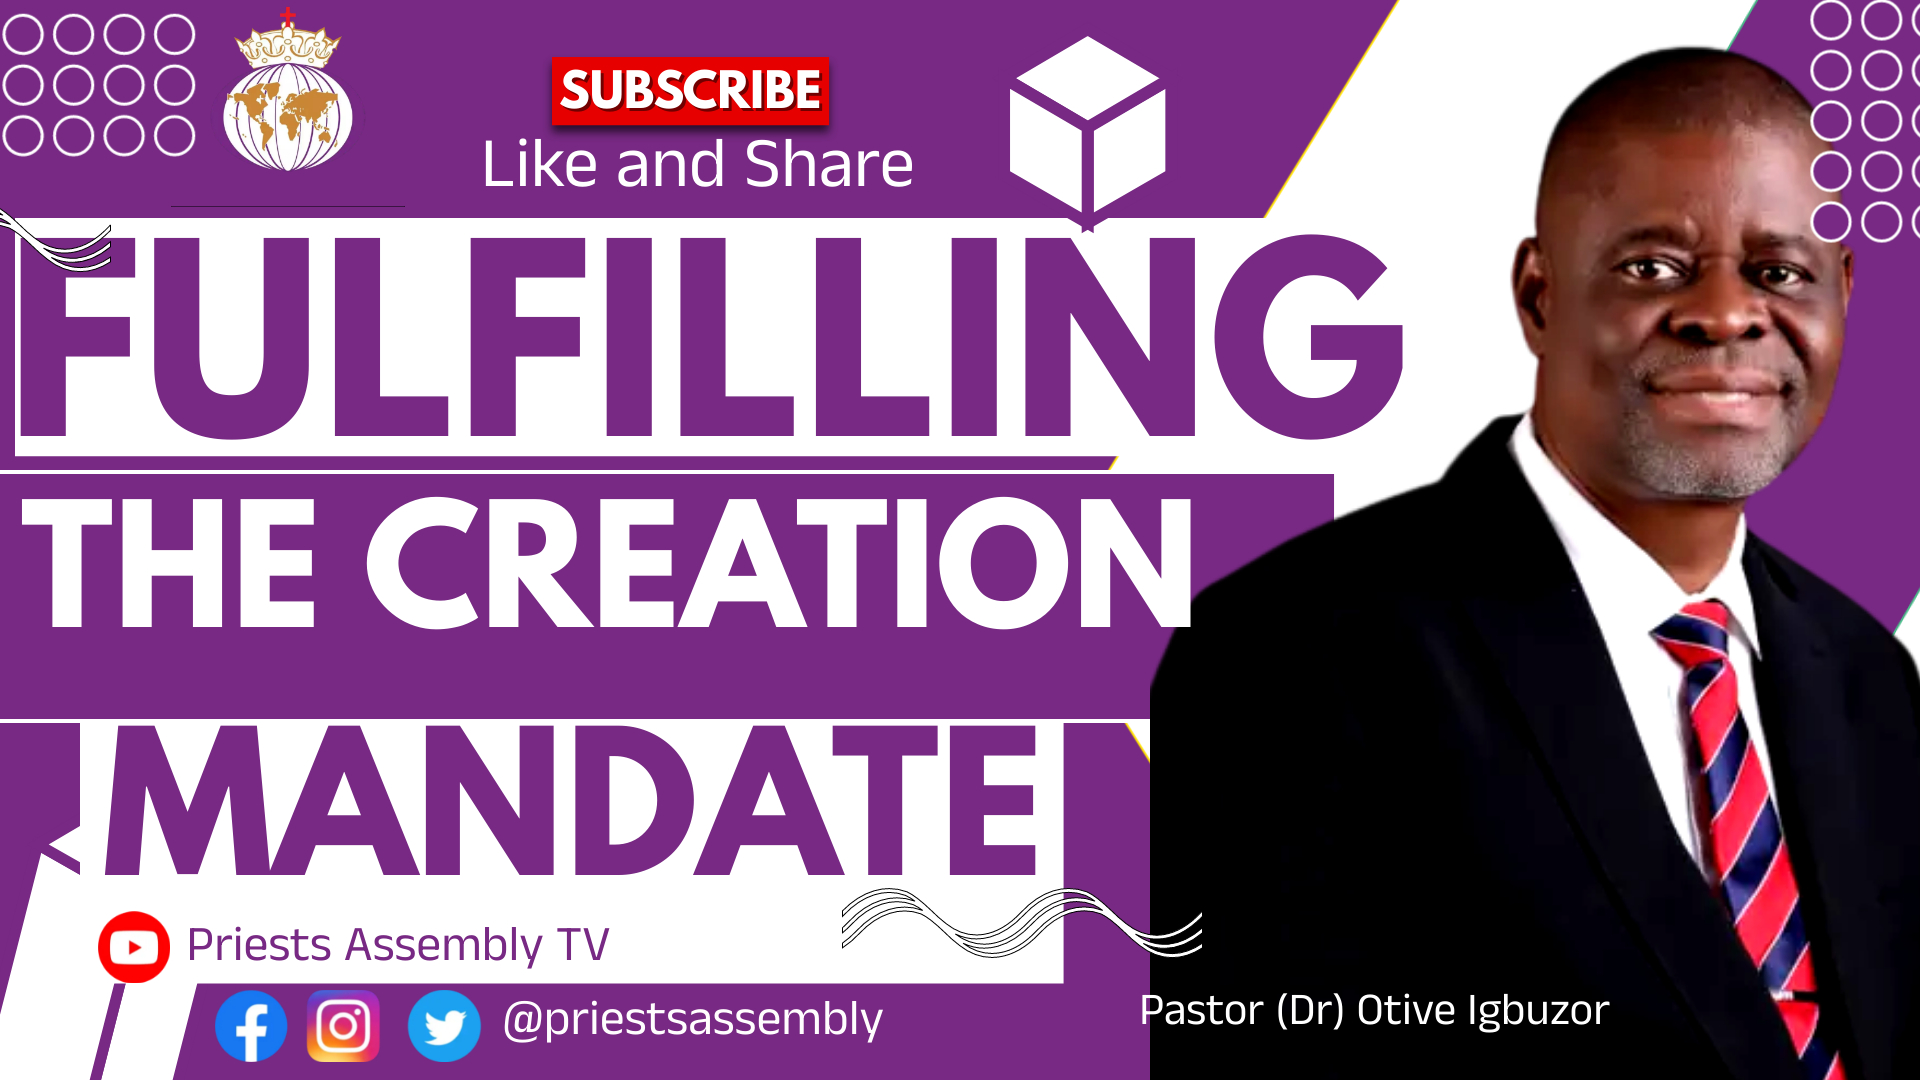 Topic: Fulfilling the Creation Mandate